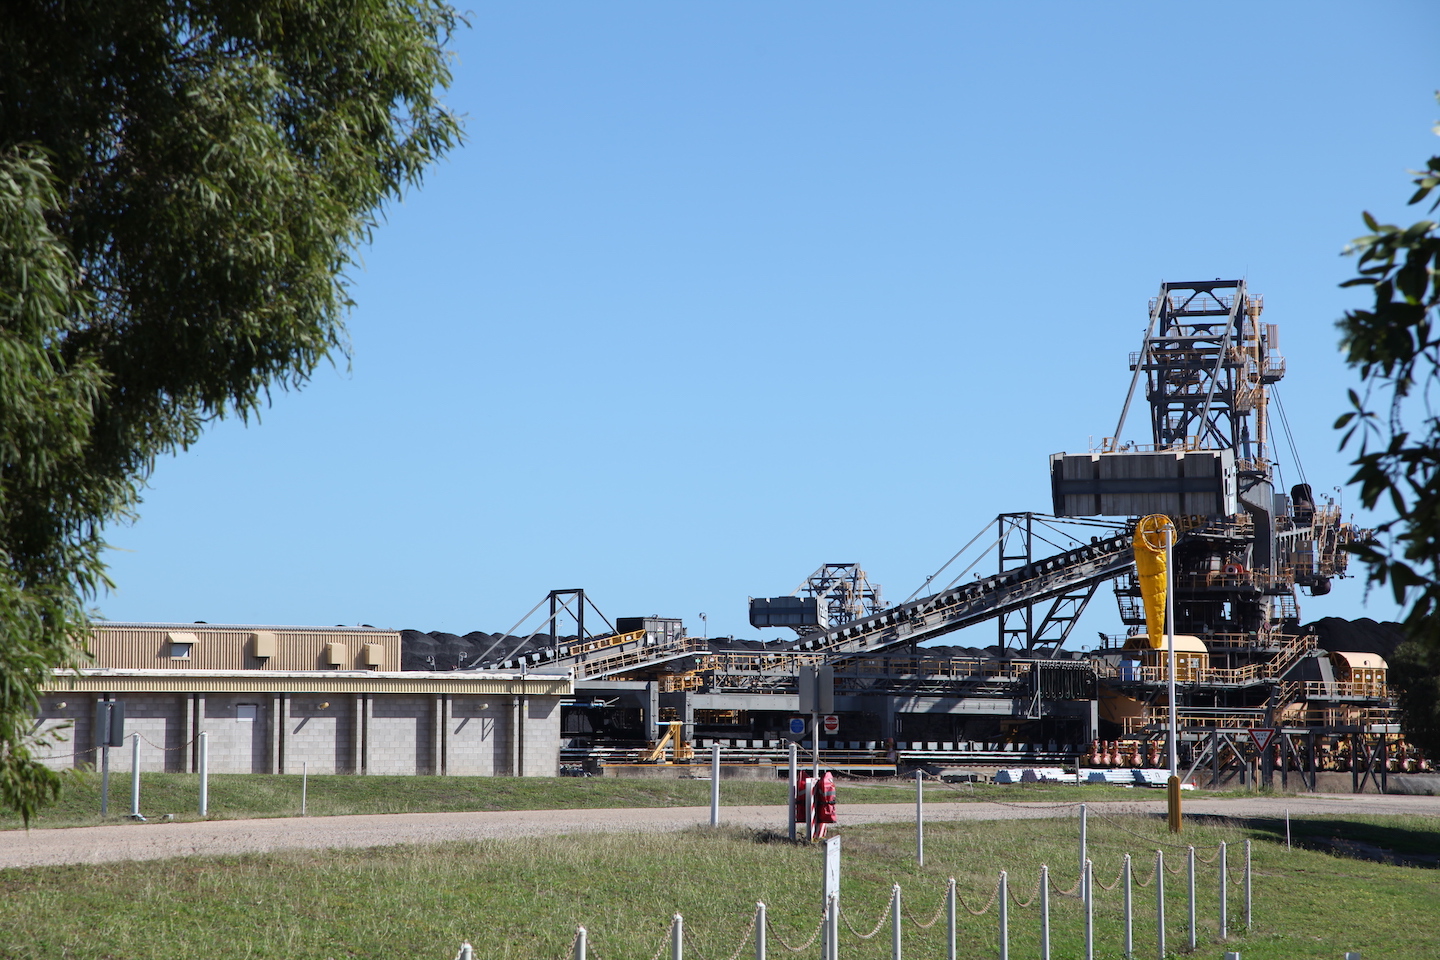 An export coal loader in Queensland, Australia (Photo © G.A.S Edwards)